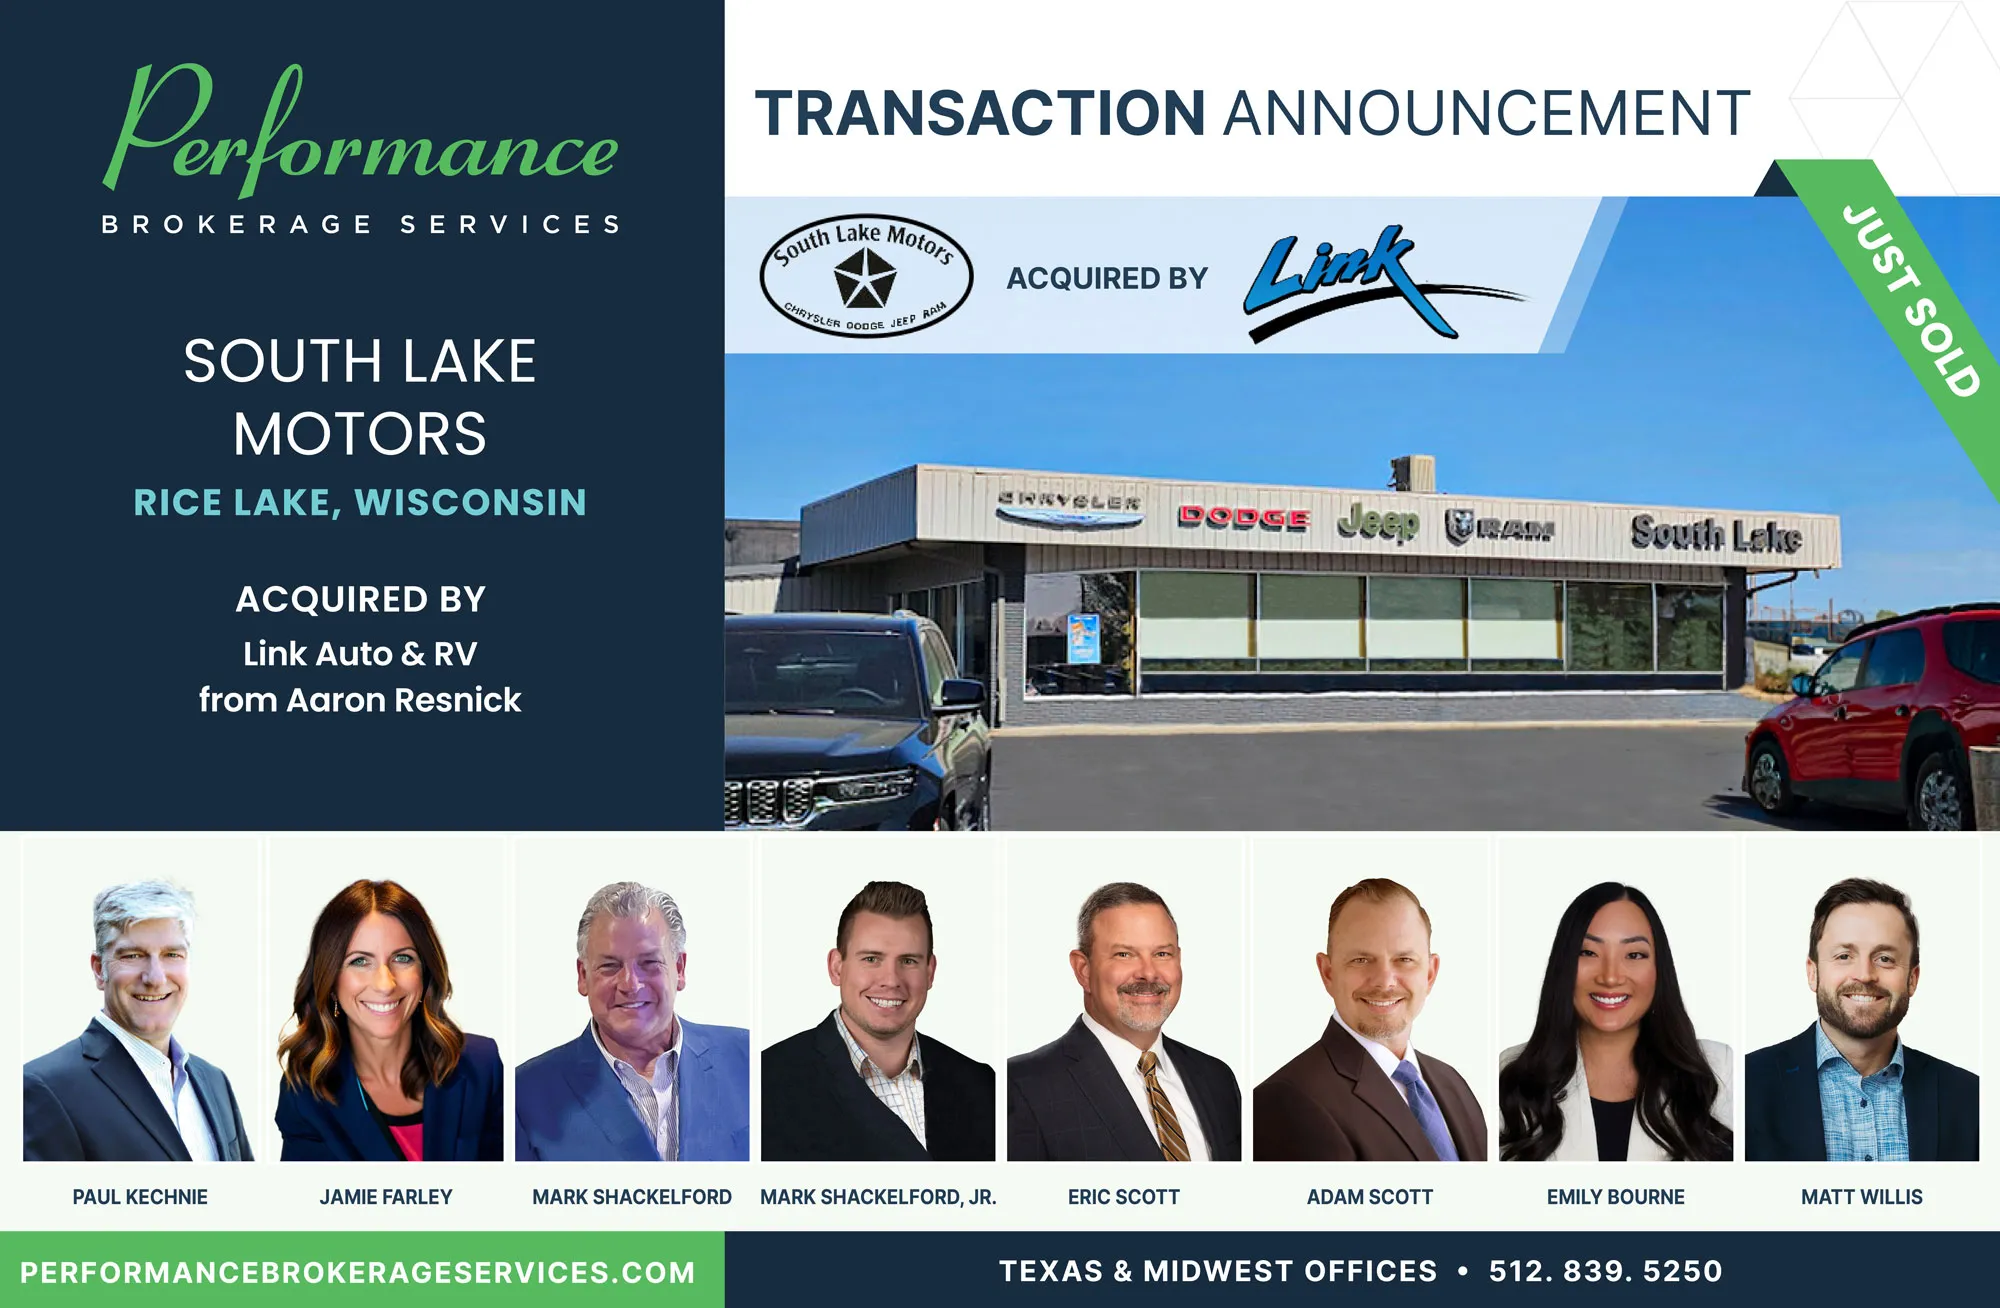 South Lake Motors sells to Link Auto & RV with Performance Brokerage